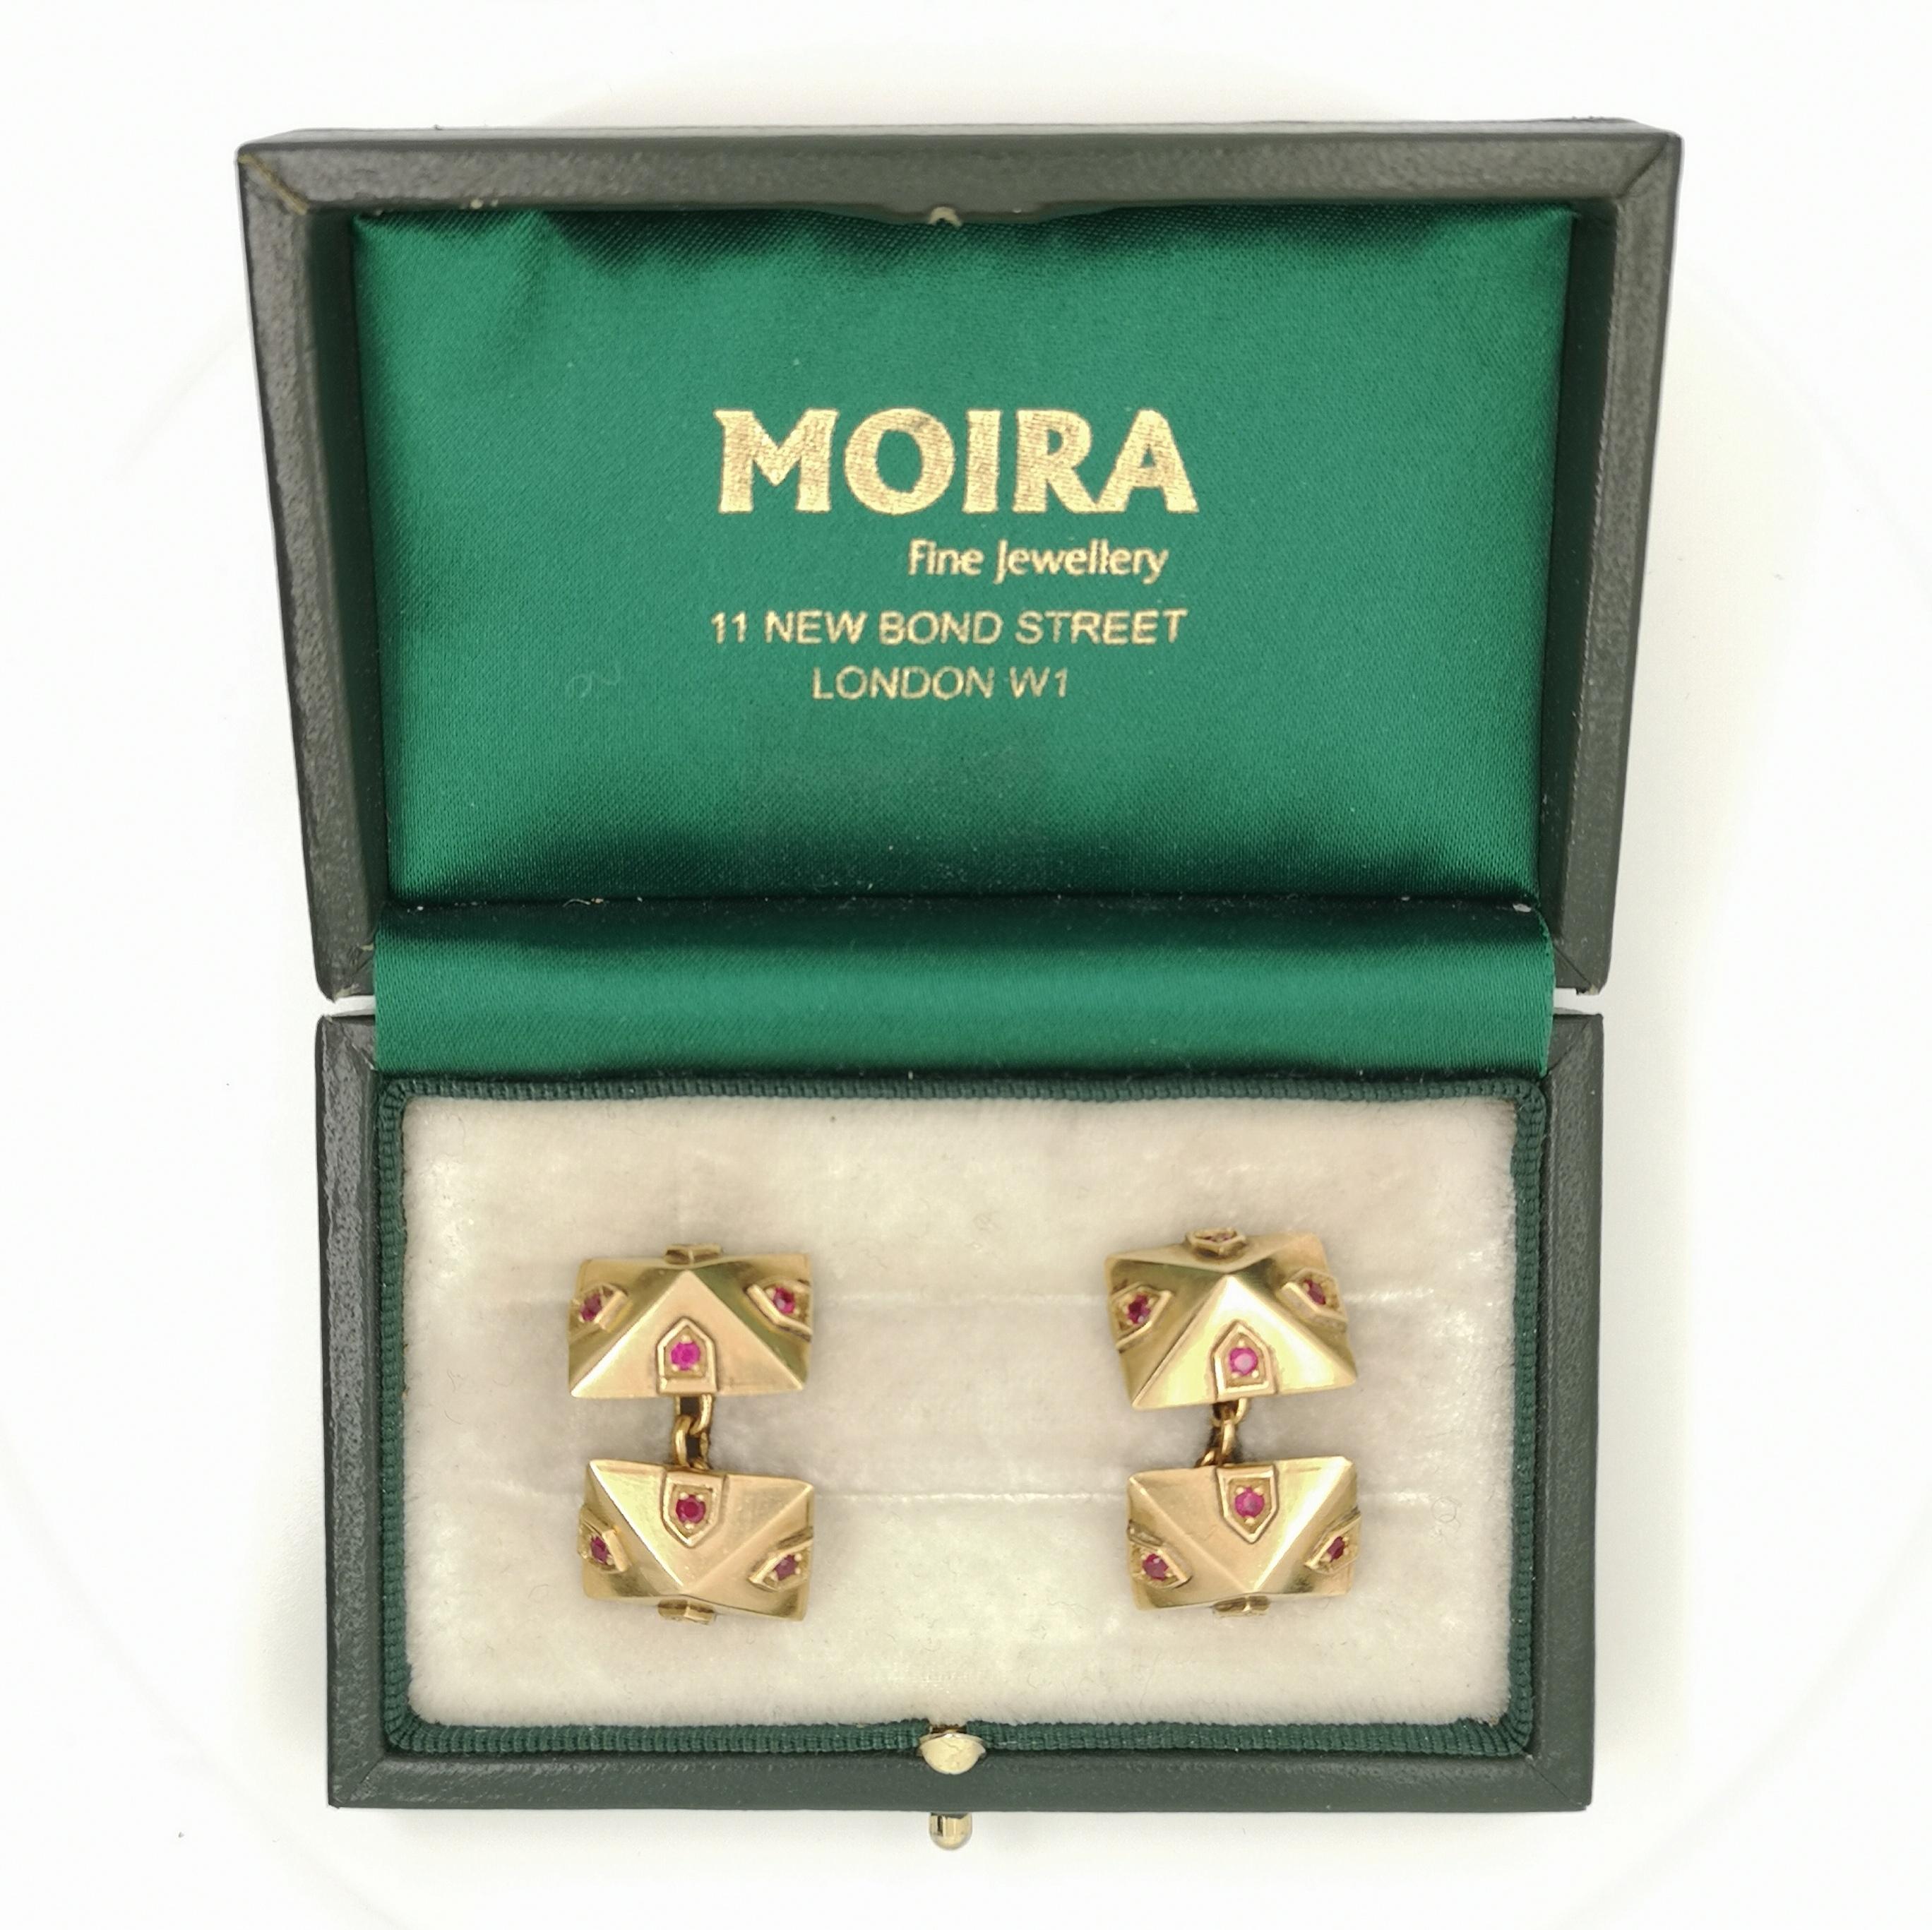 A pair of vintage, Van Cleef & Arpels, gold, double-sided pyramid shaped cufflinks, each face set with four rubies. With chain link fittings. Signed VCA 18K NY. Circa 1960.